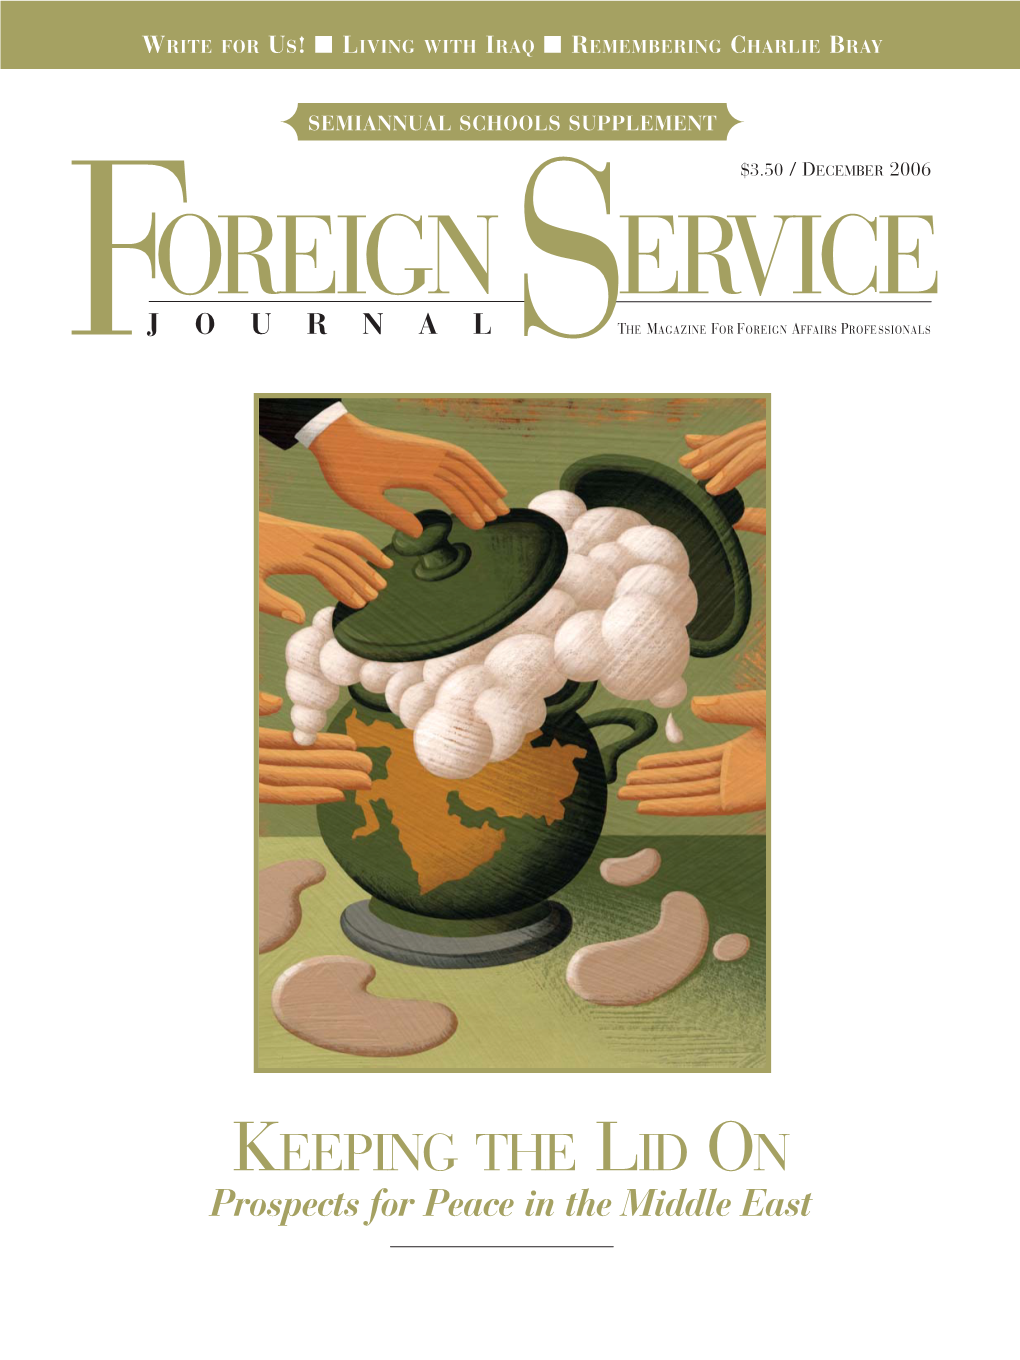 The Foreign Service Journal, December 2006.Pdf